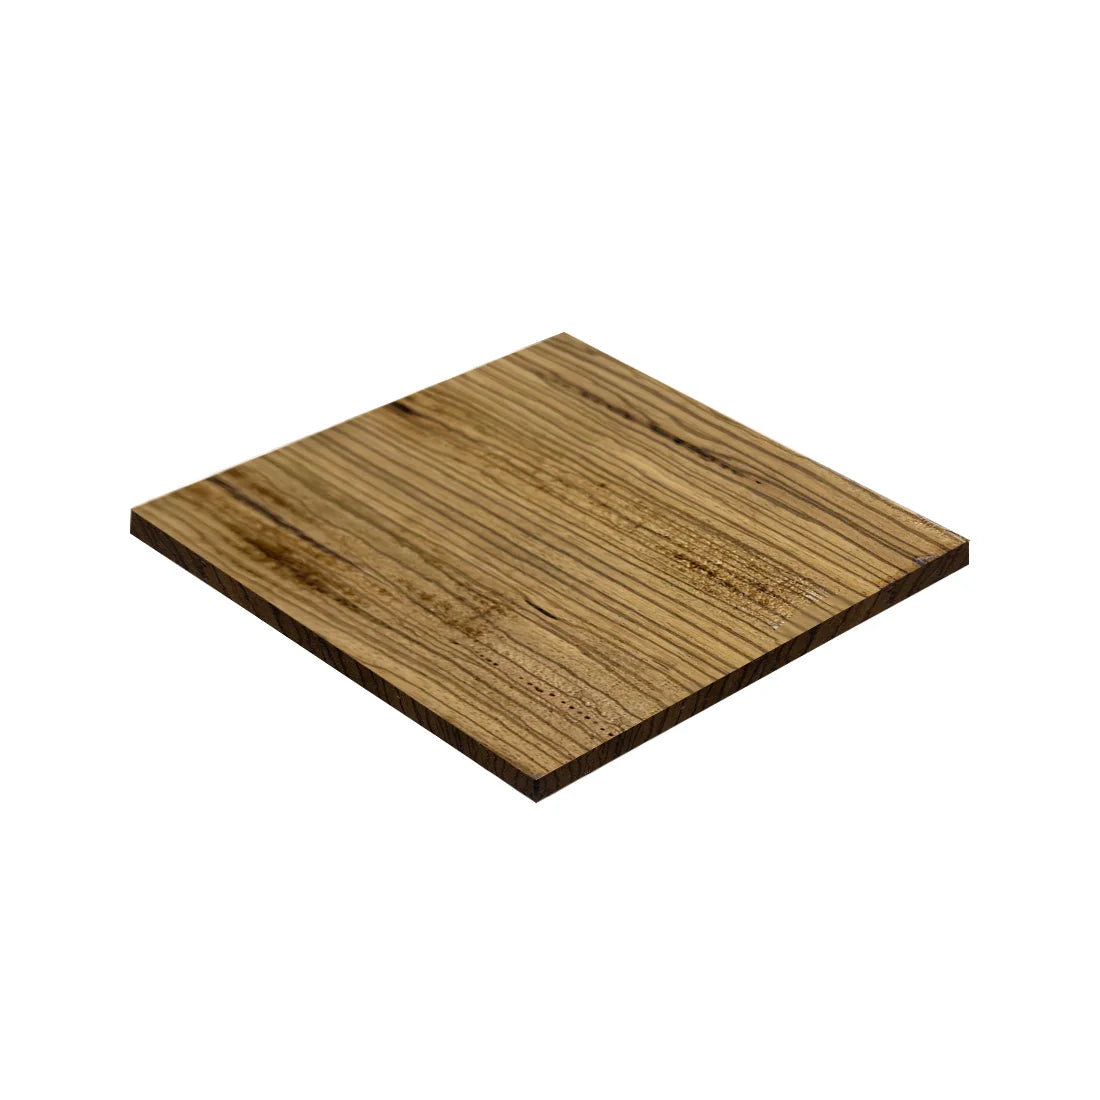 Zebrawood Guitar Rosette Square blanks 6” x 6” x 3mm - Exotic Wood Zone - Buy online Across USA 